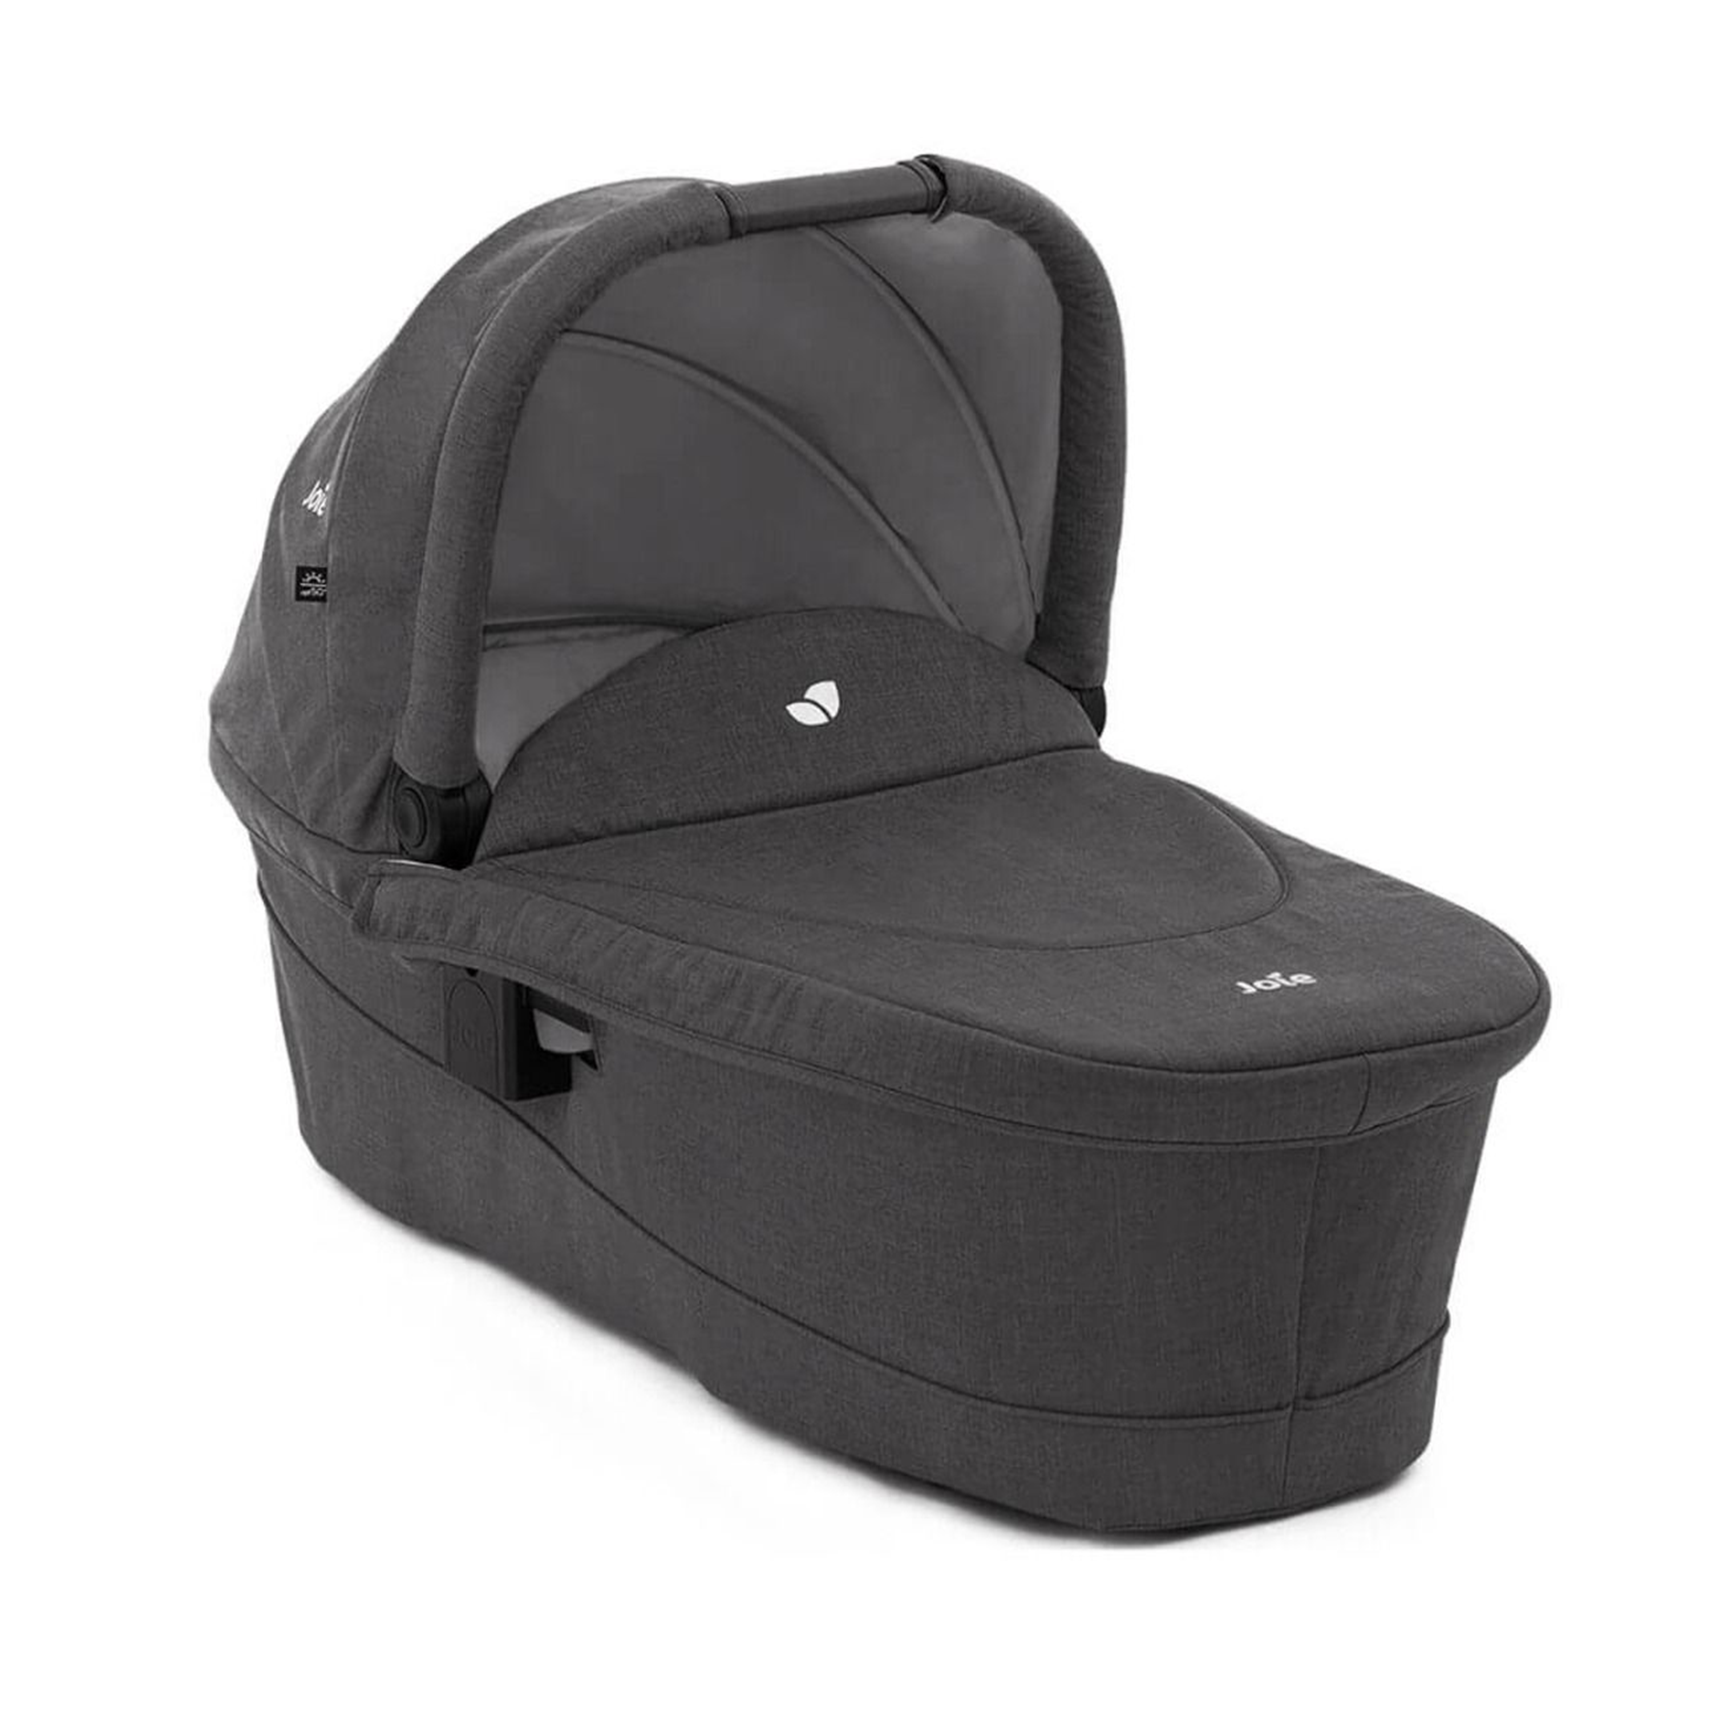 Joie Ramble XL Carrycot in Shale Chassis & Carrycots A1219PDSHA000 5056080615233